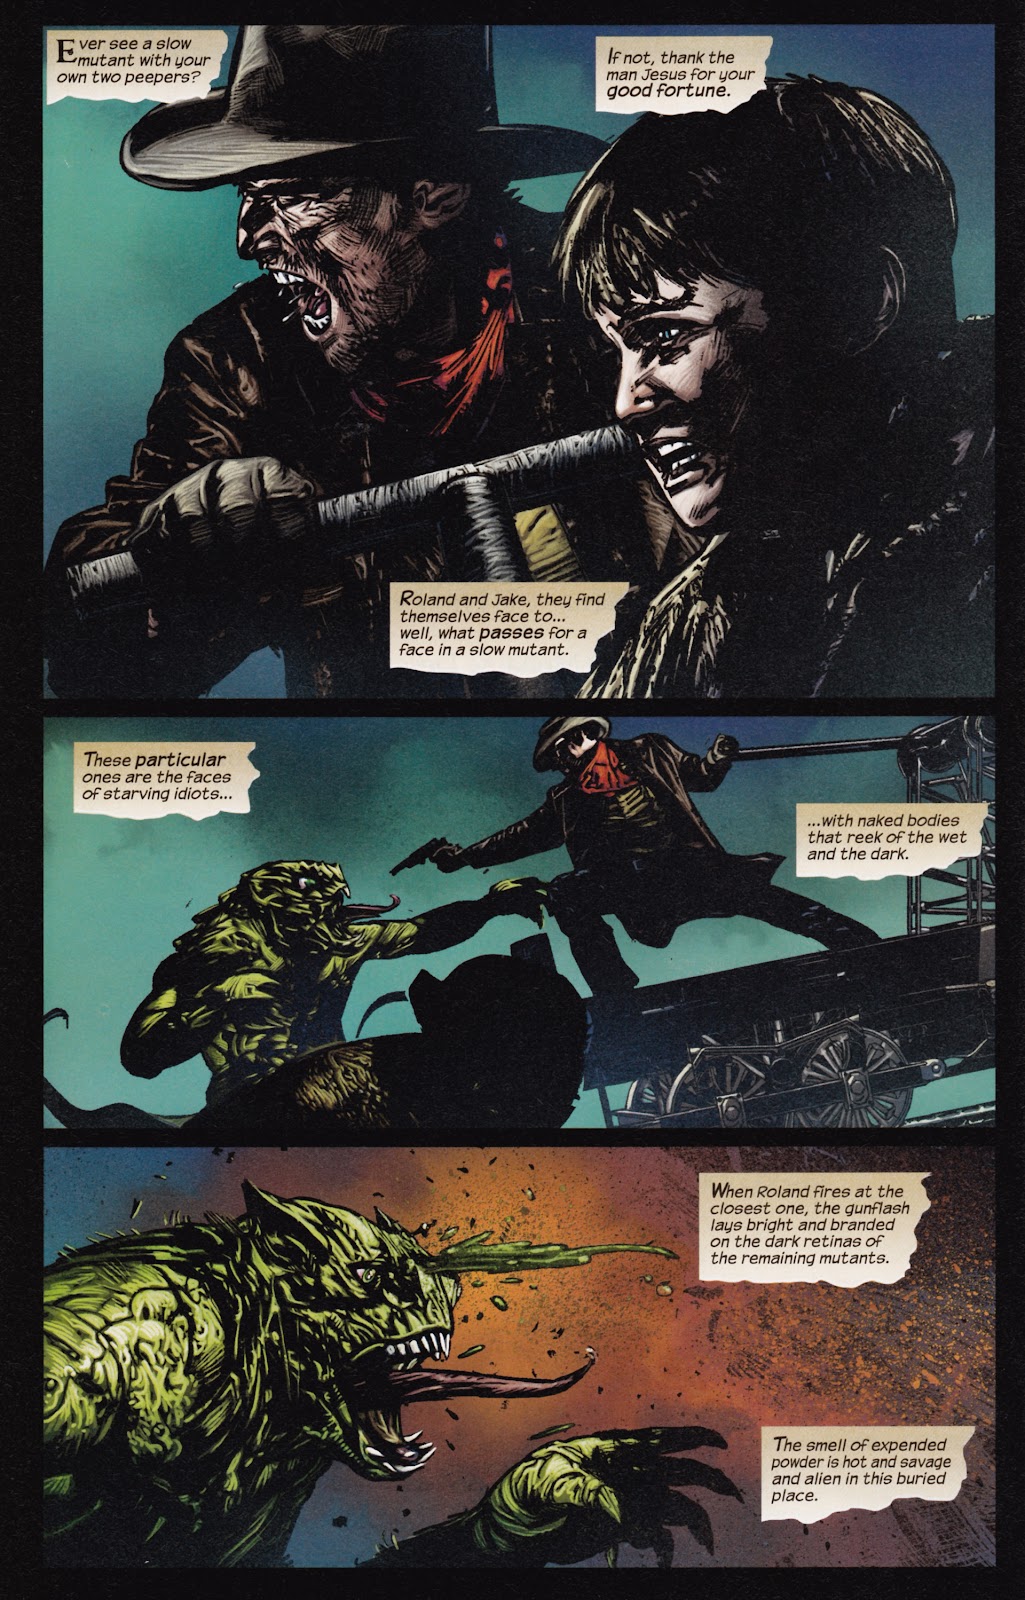 Dark Tower: The Gunslinger - The Man in Black issue 3 - Page 3